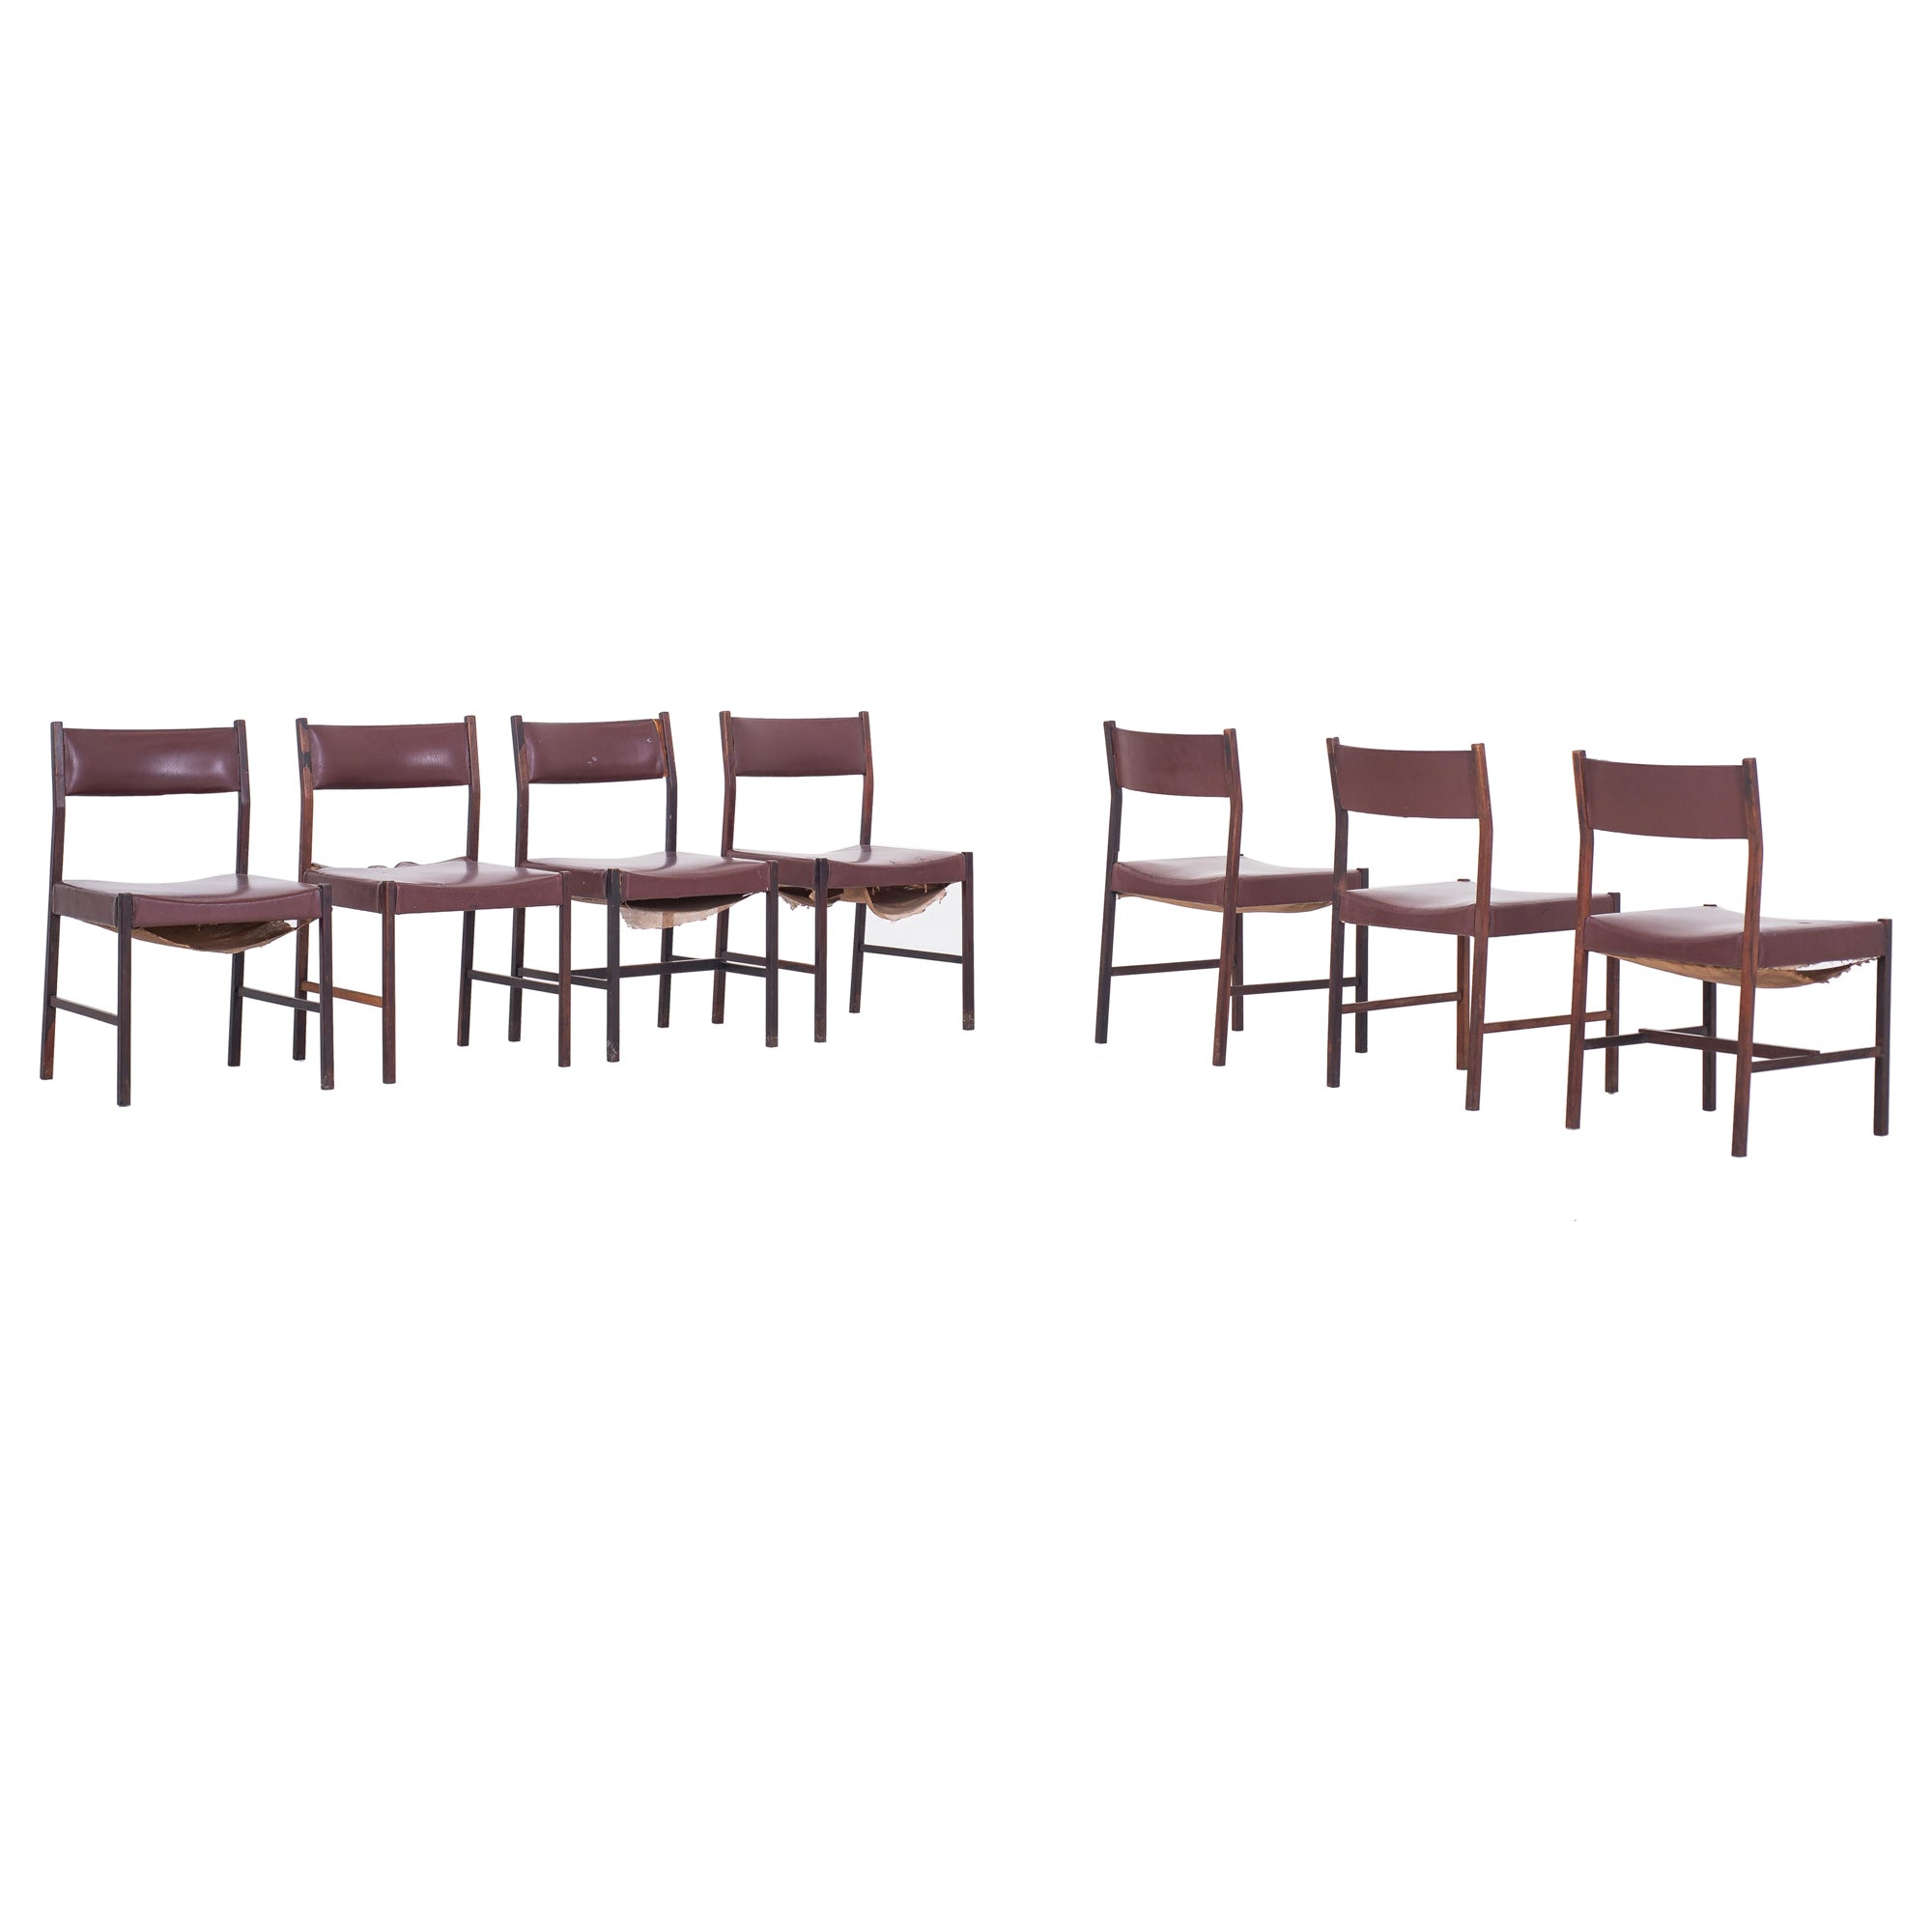 Set of 7 Itamaraty Dining Chairs in Original Condition By Jorge Zalszupin, 1959